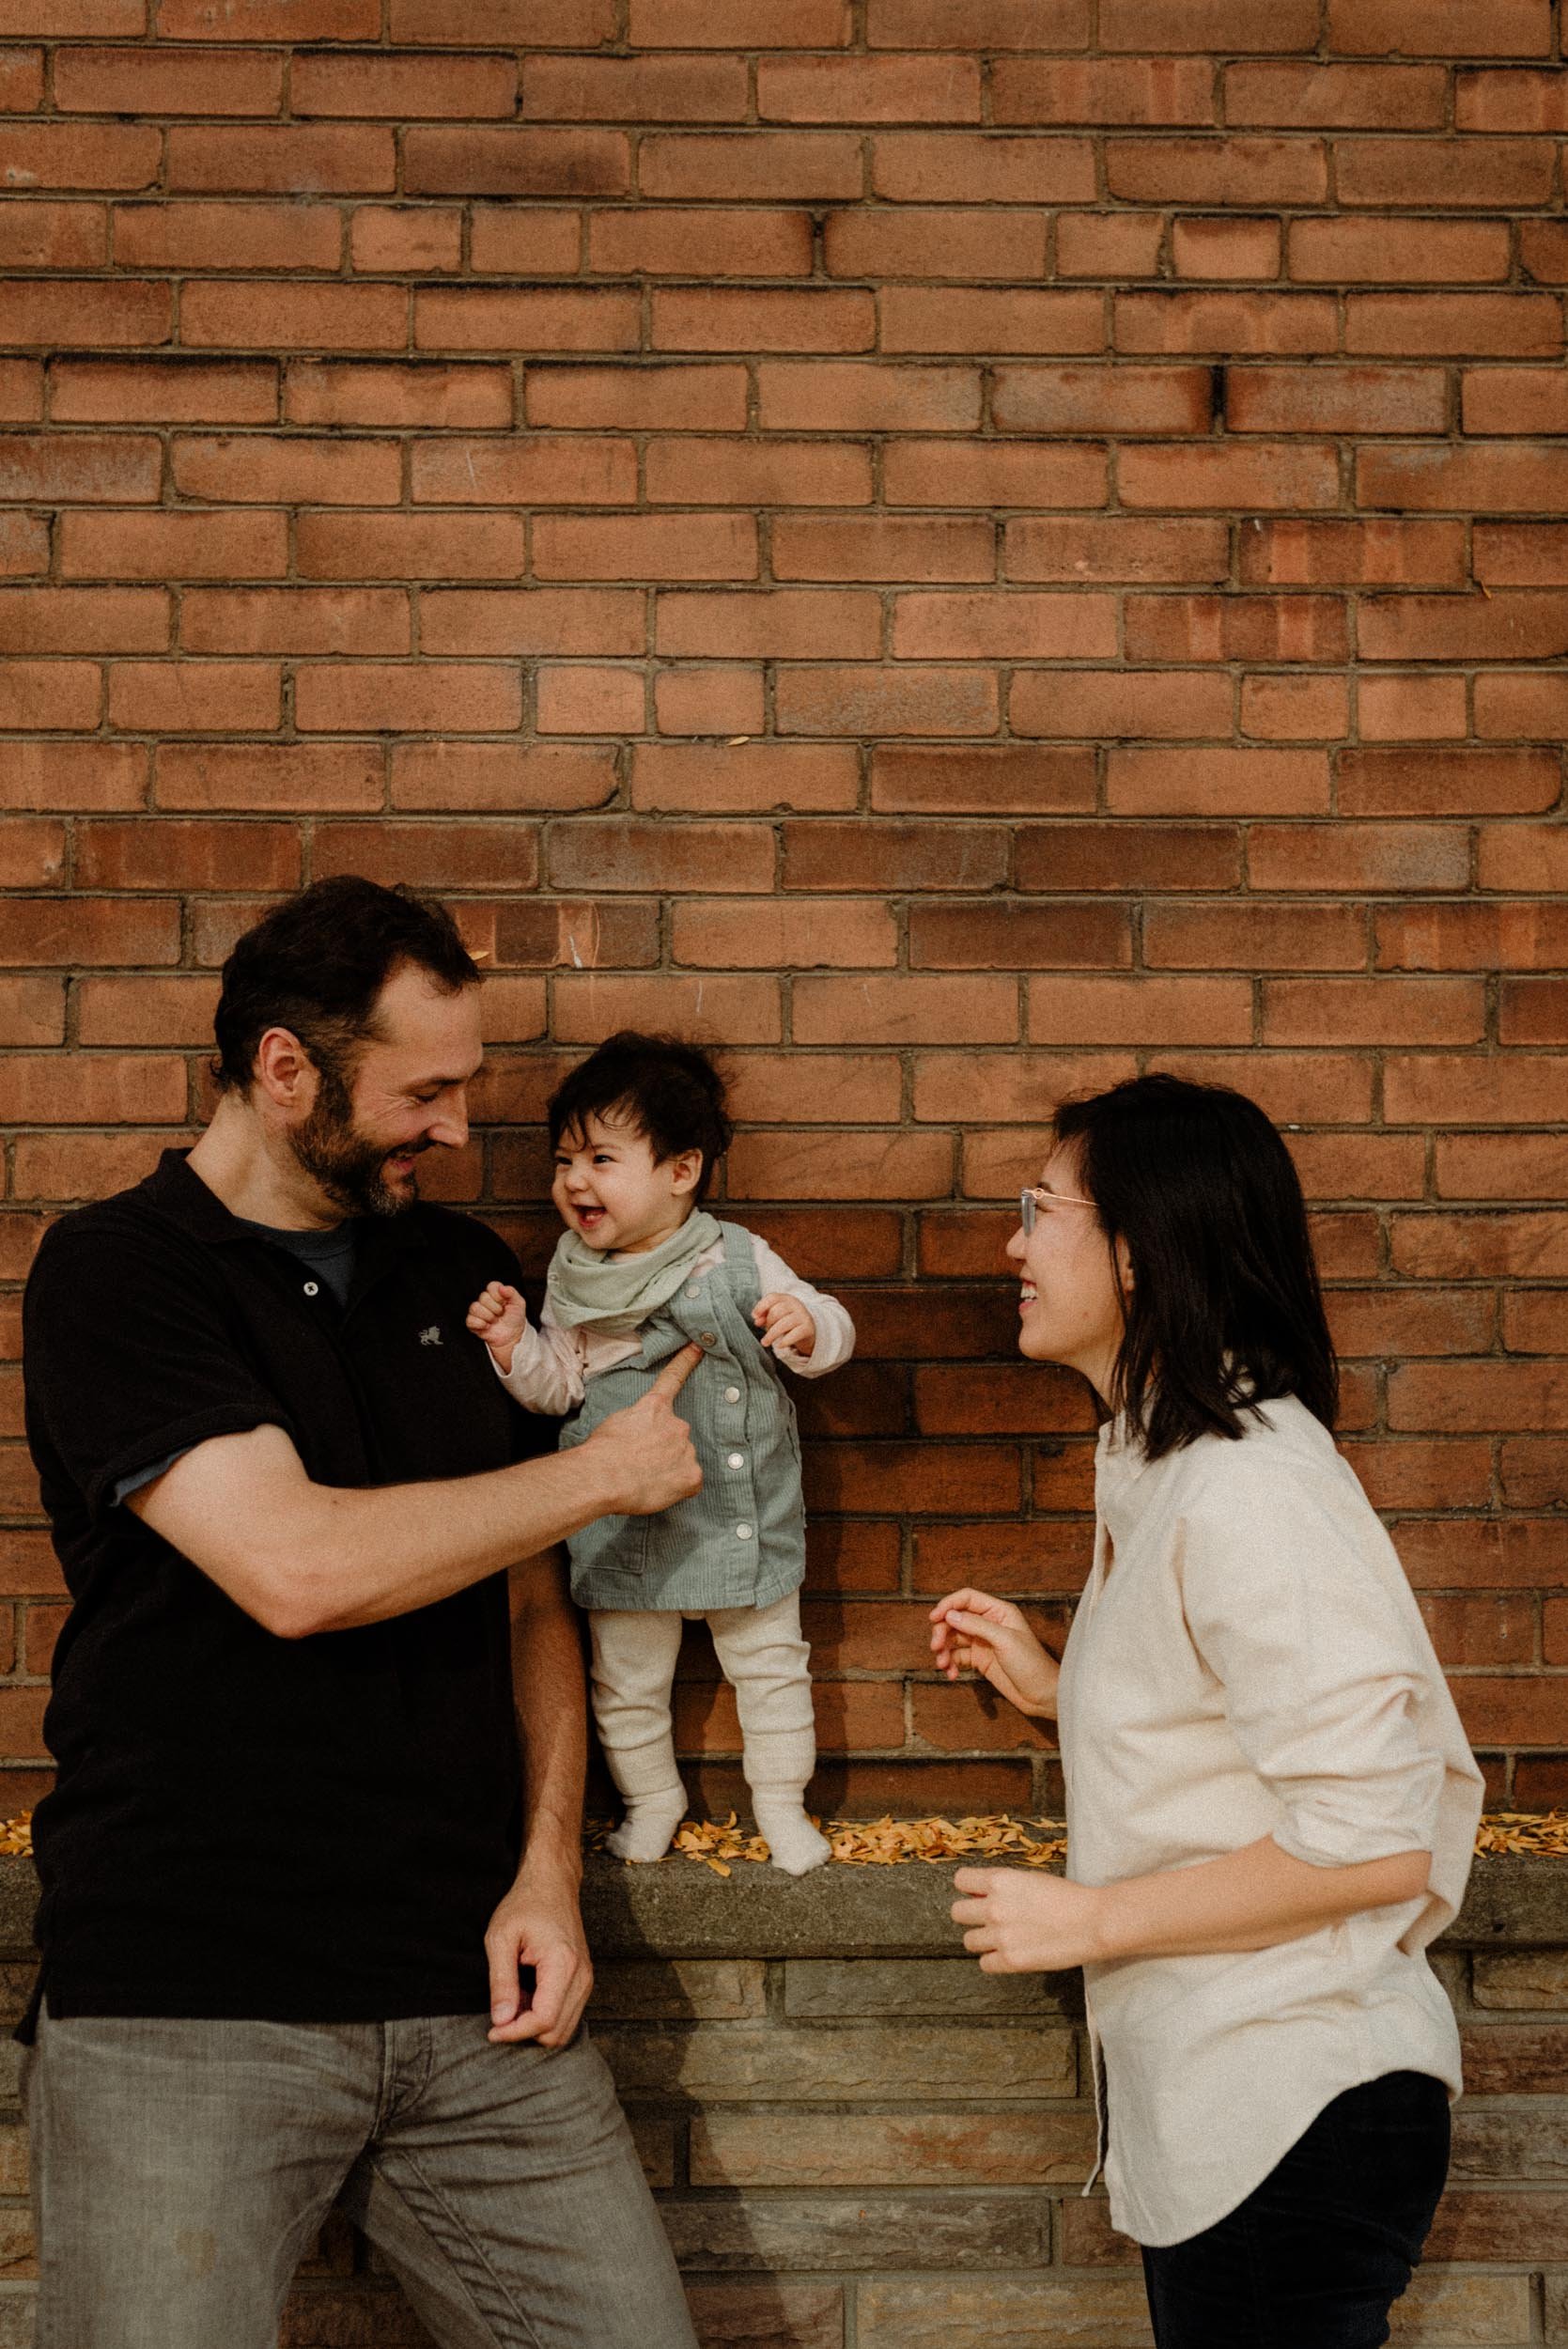 Family laughing with their baby girl in a Toronto neighborhood